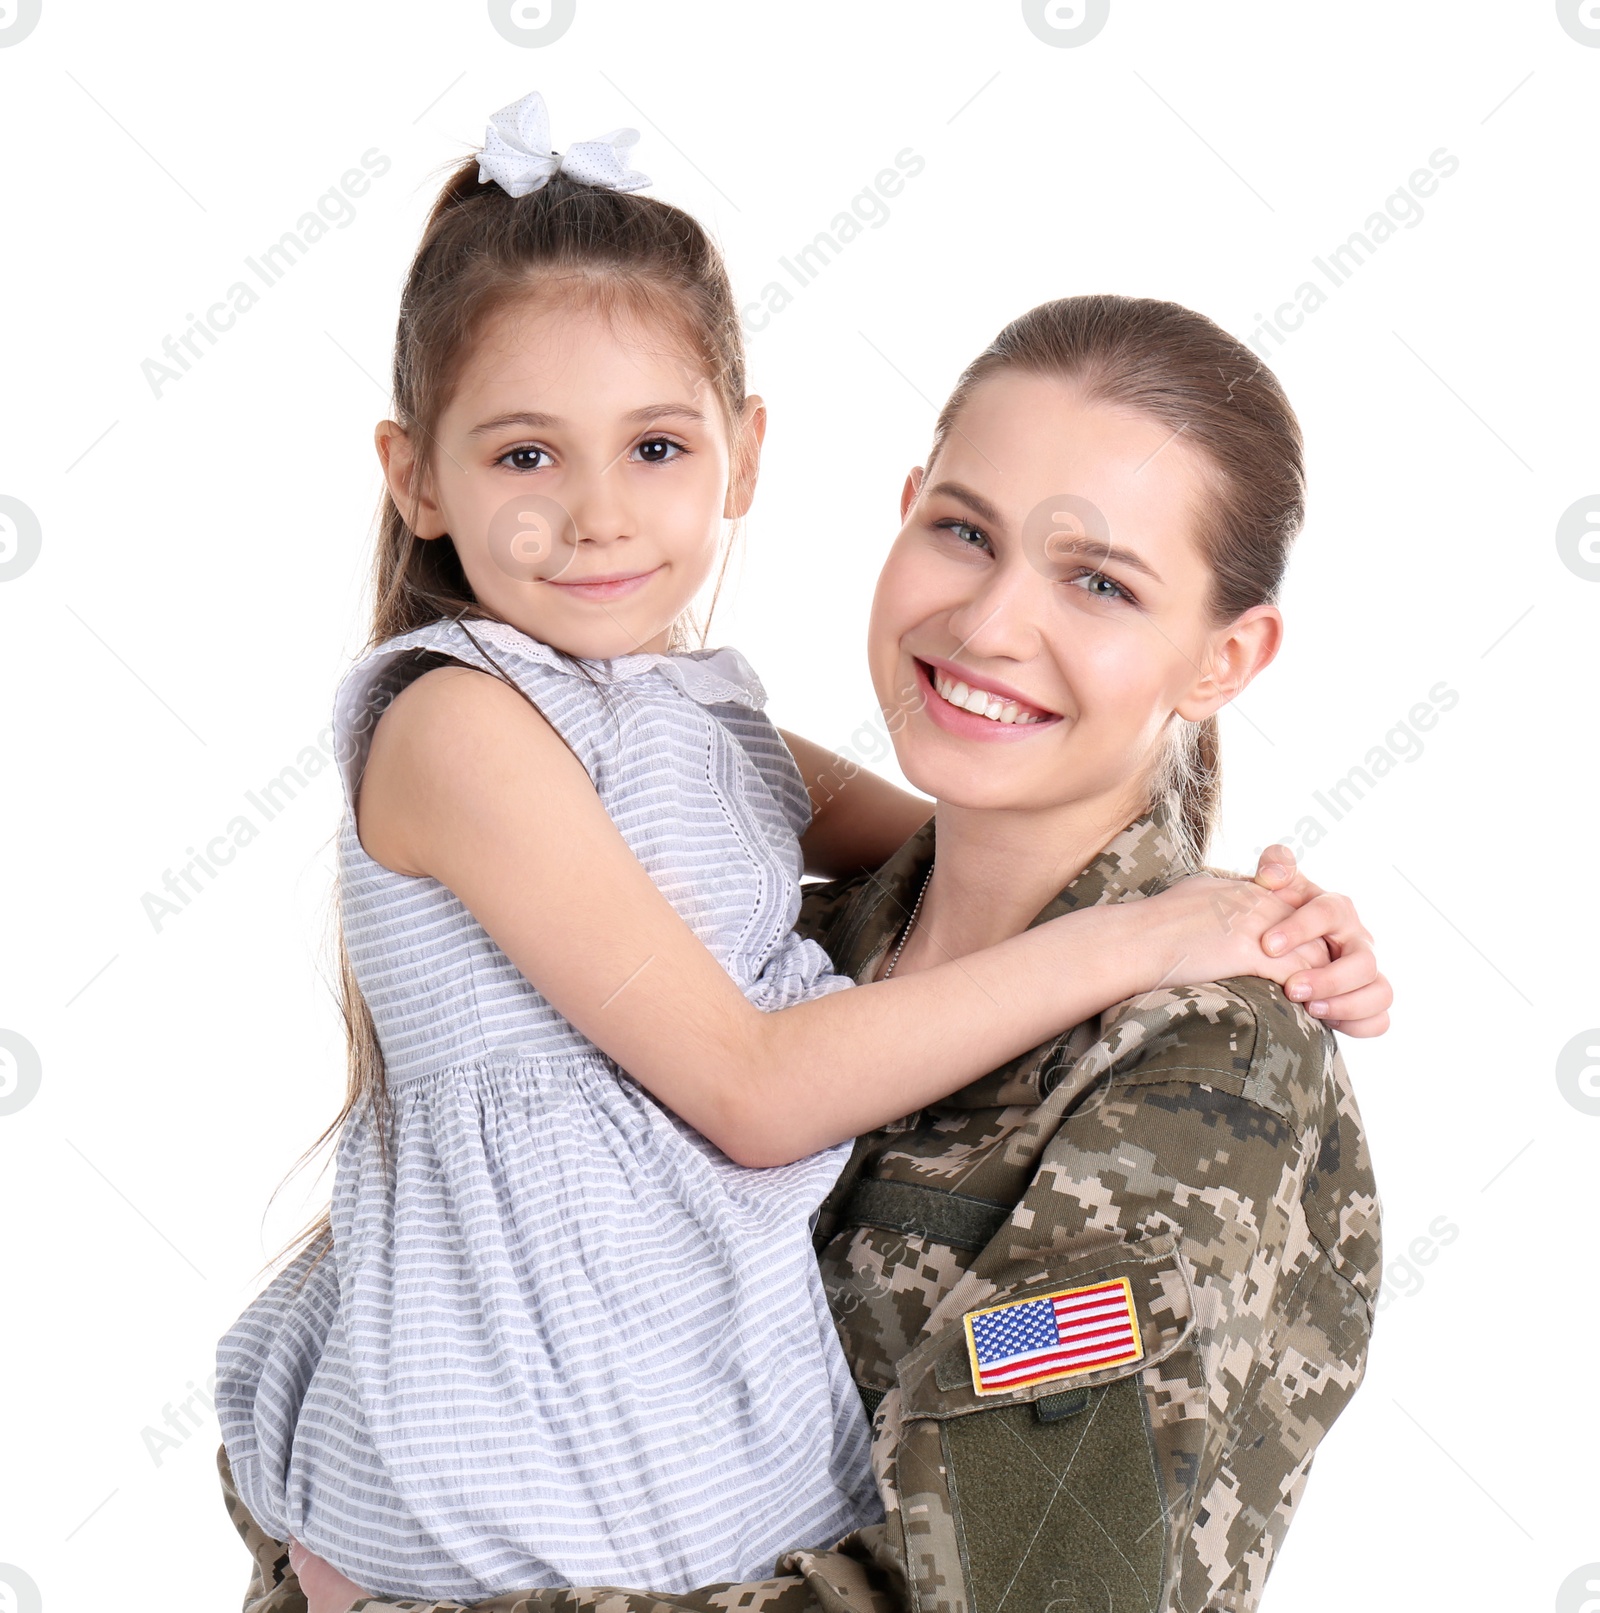 Photo of Female soldier with her daughter on white background. Military service